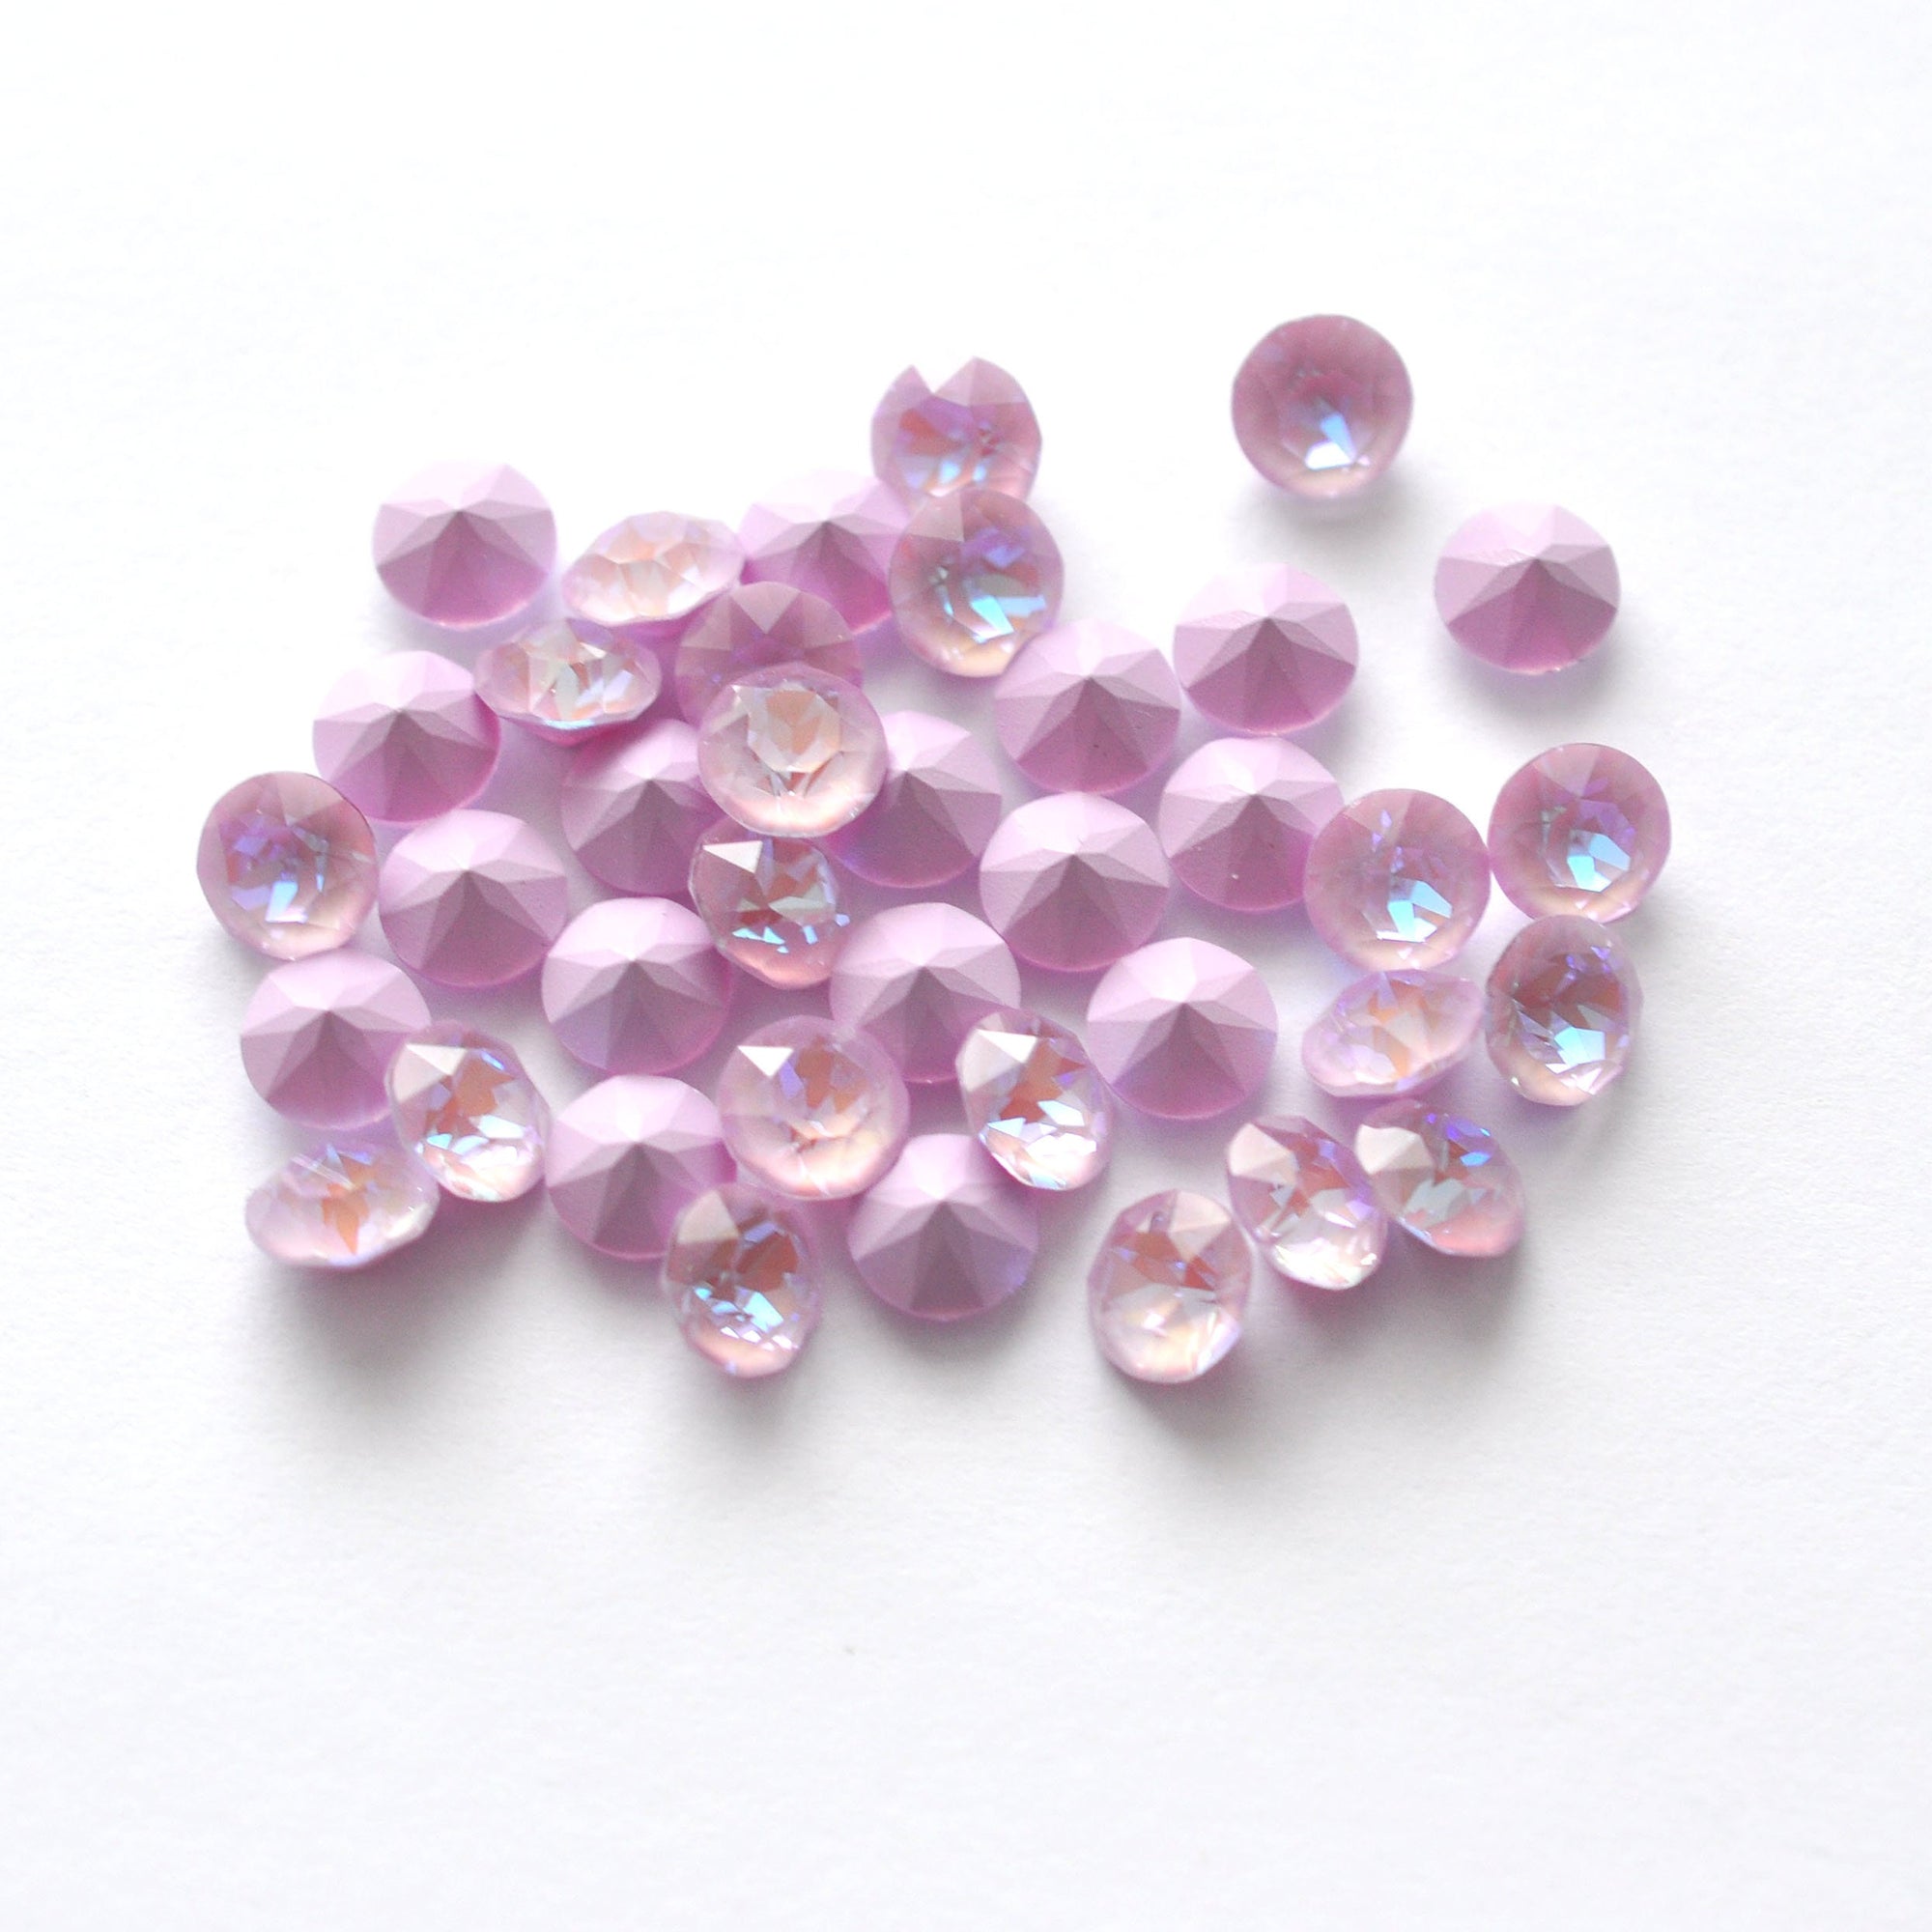 Lavender DeLite 1088 Pointed Back Chaton Barton Crystal 29ss, 6mm